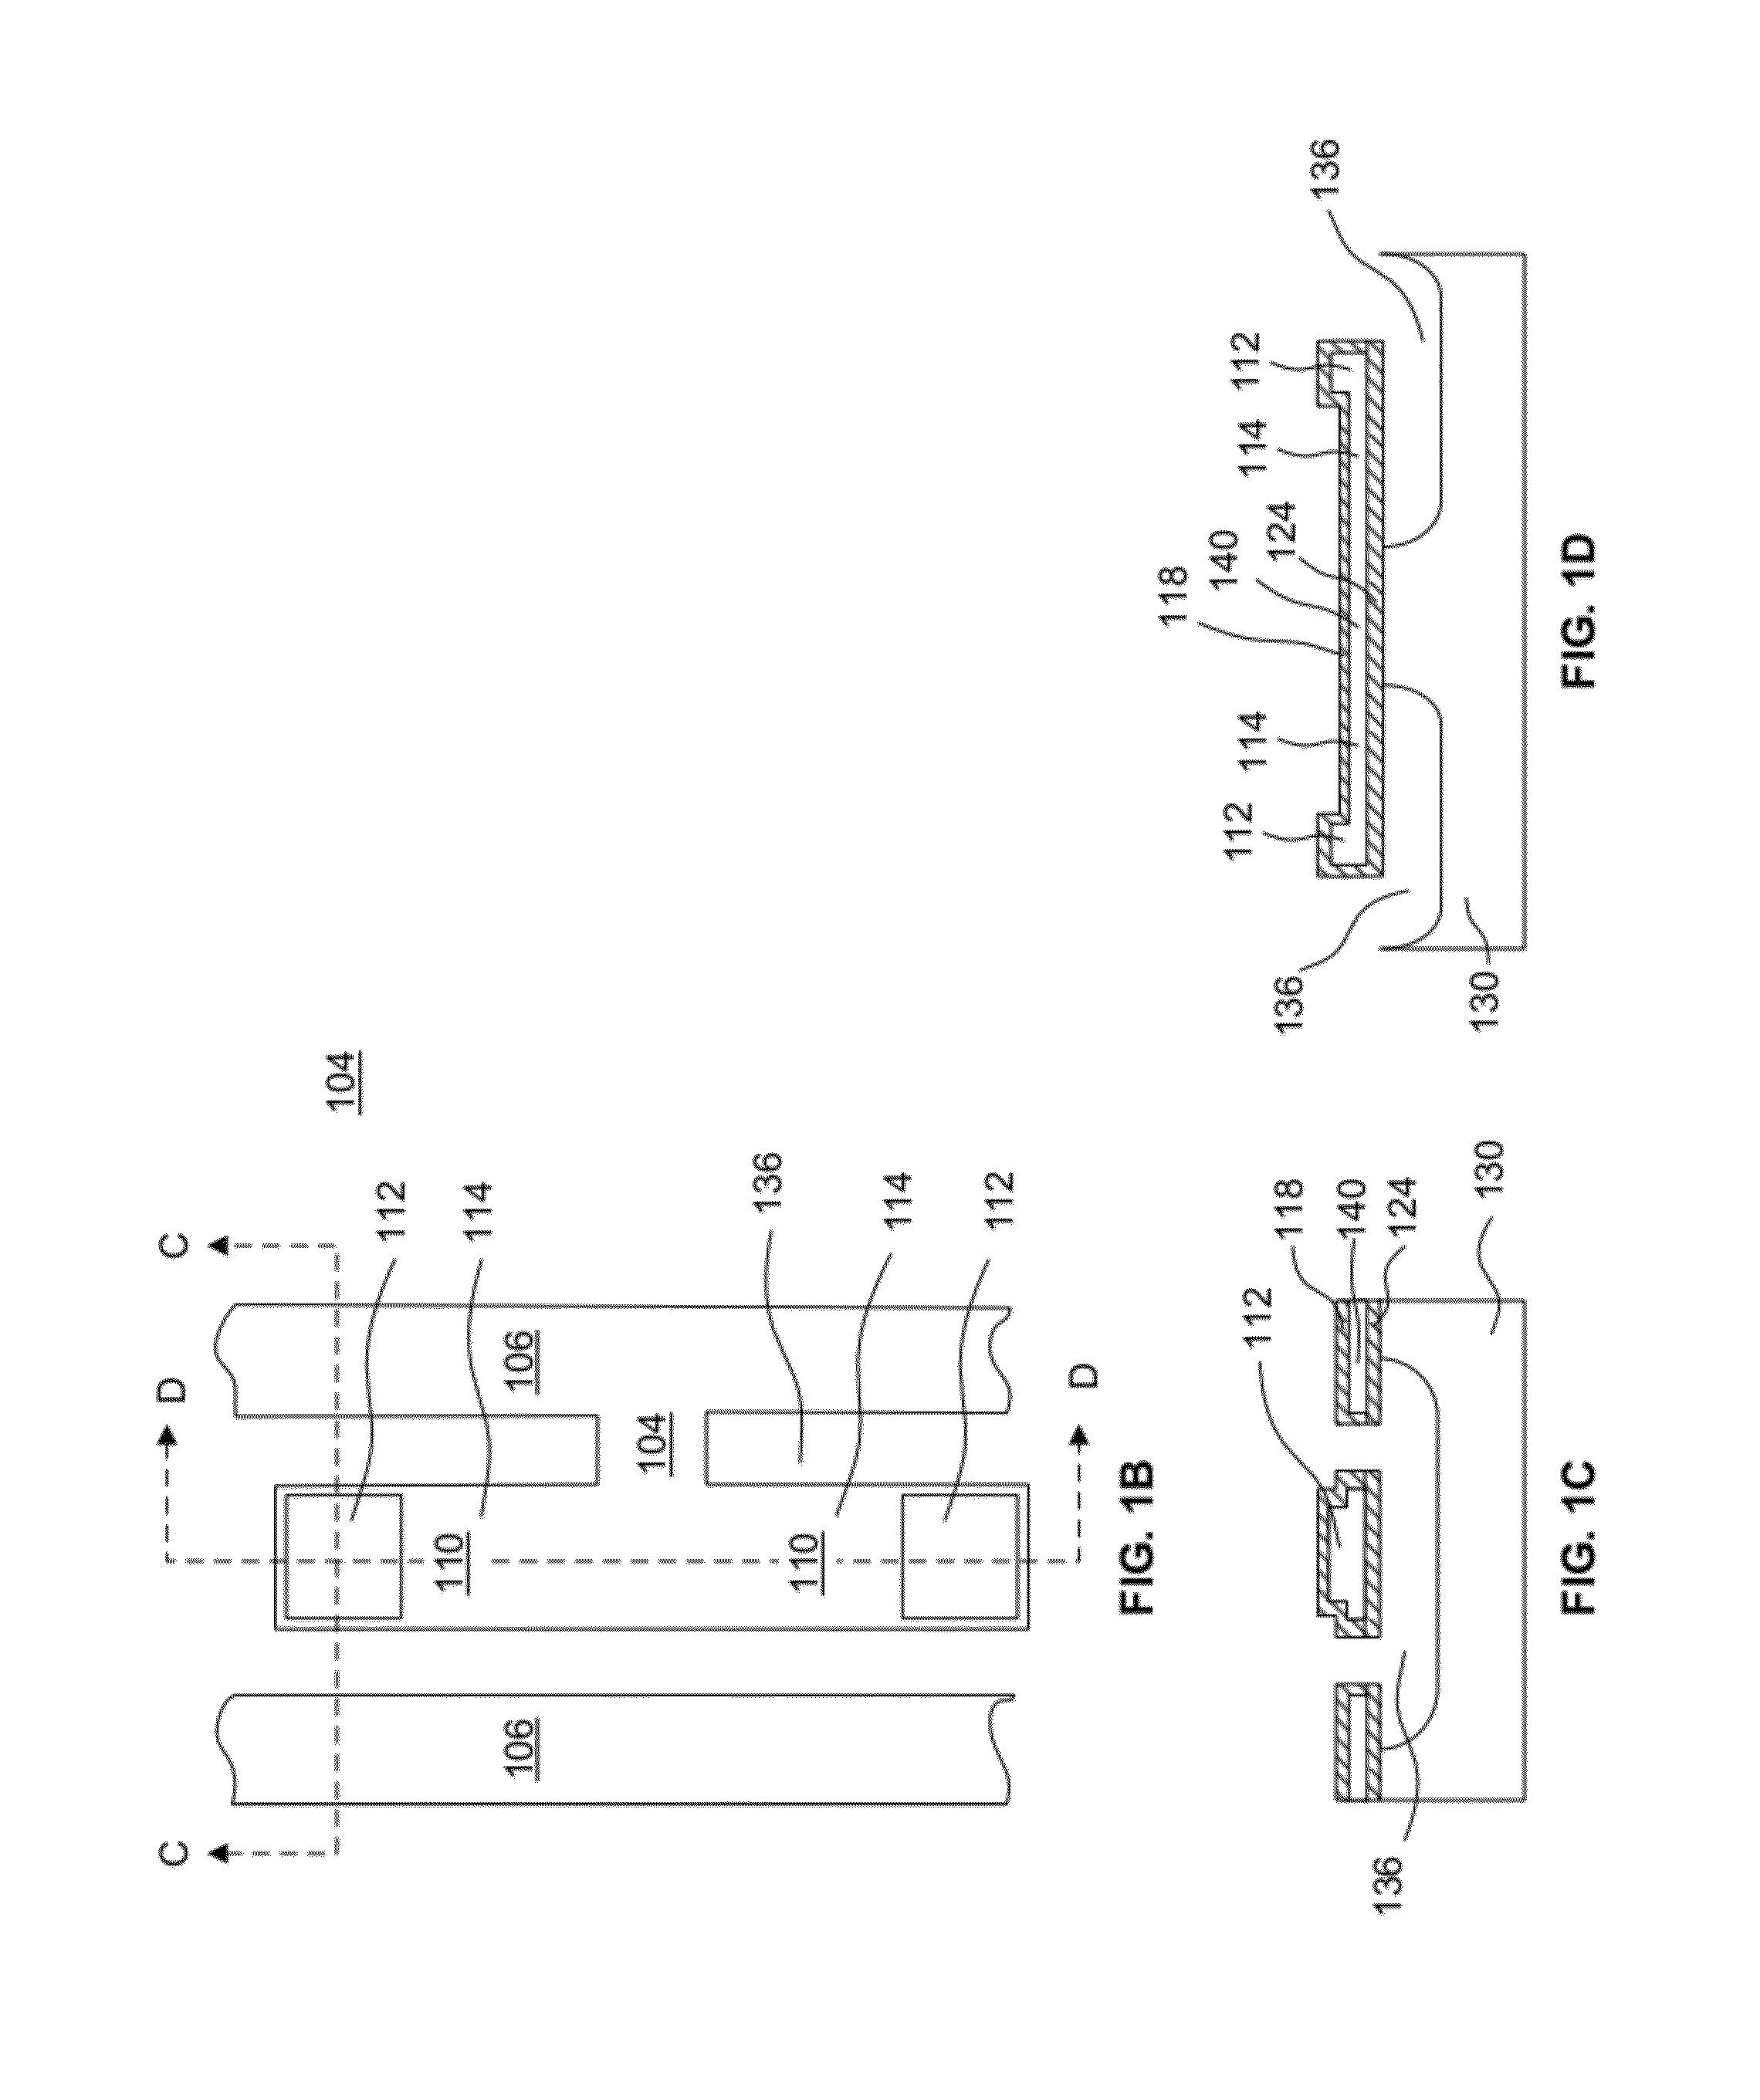 Method of forming a compliant monopolar micro device transfer head with silicon electrode